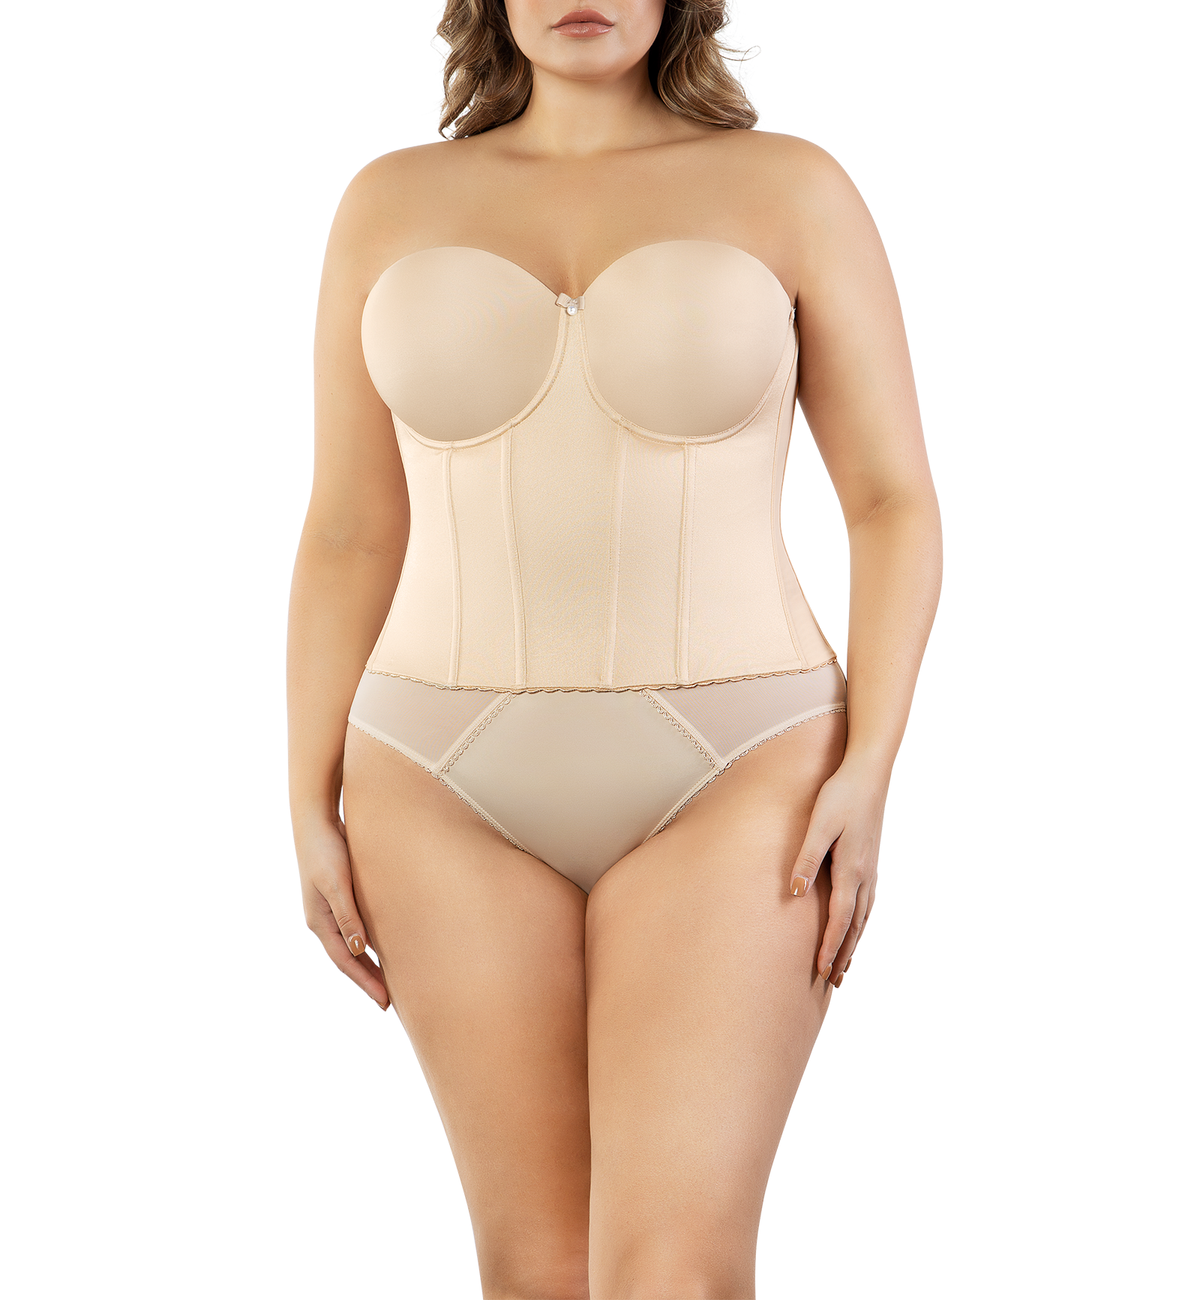 Parfait Elise Full Back Longline Smoothing Bustier (P6097),Small,Bare - Bare,Small